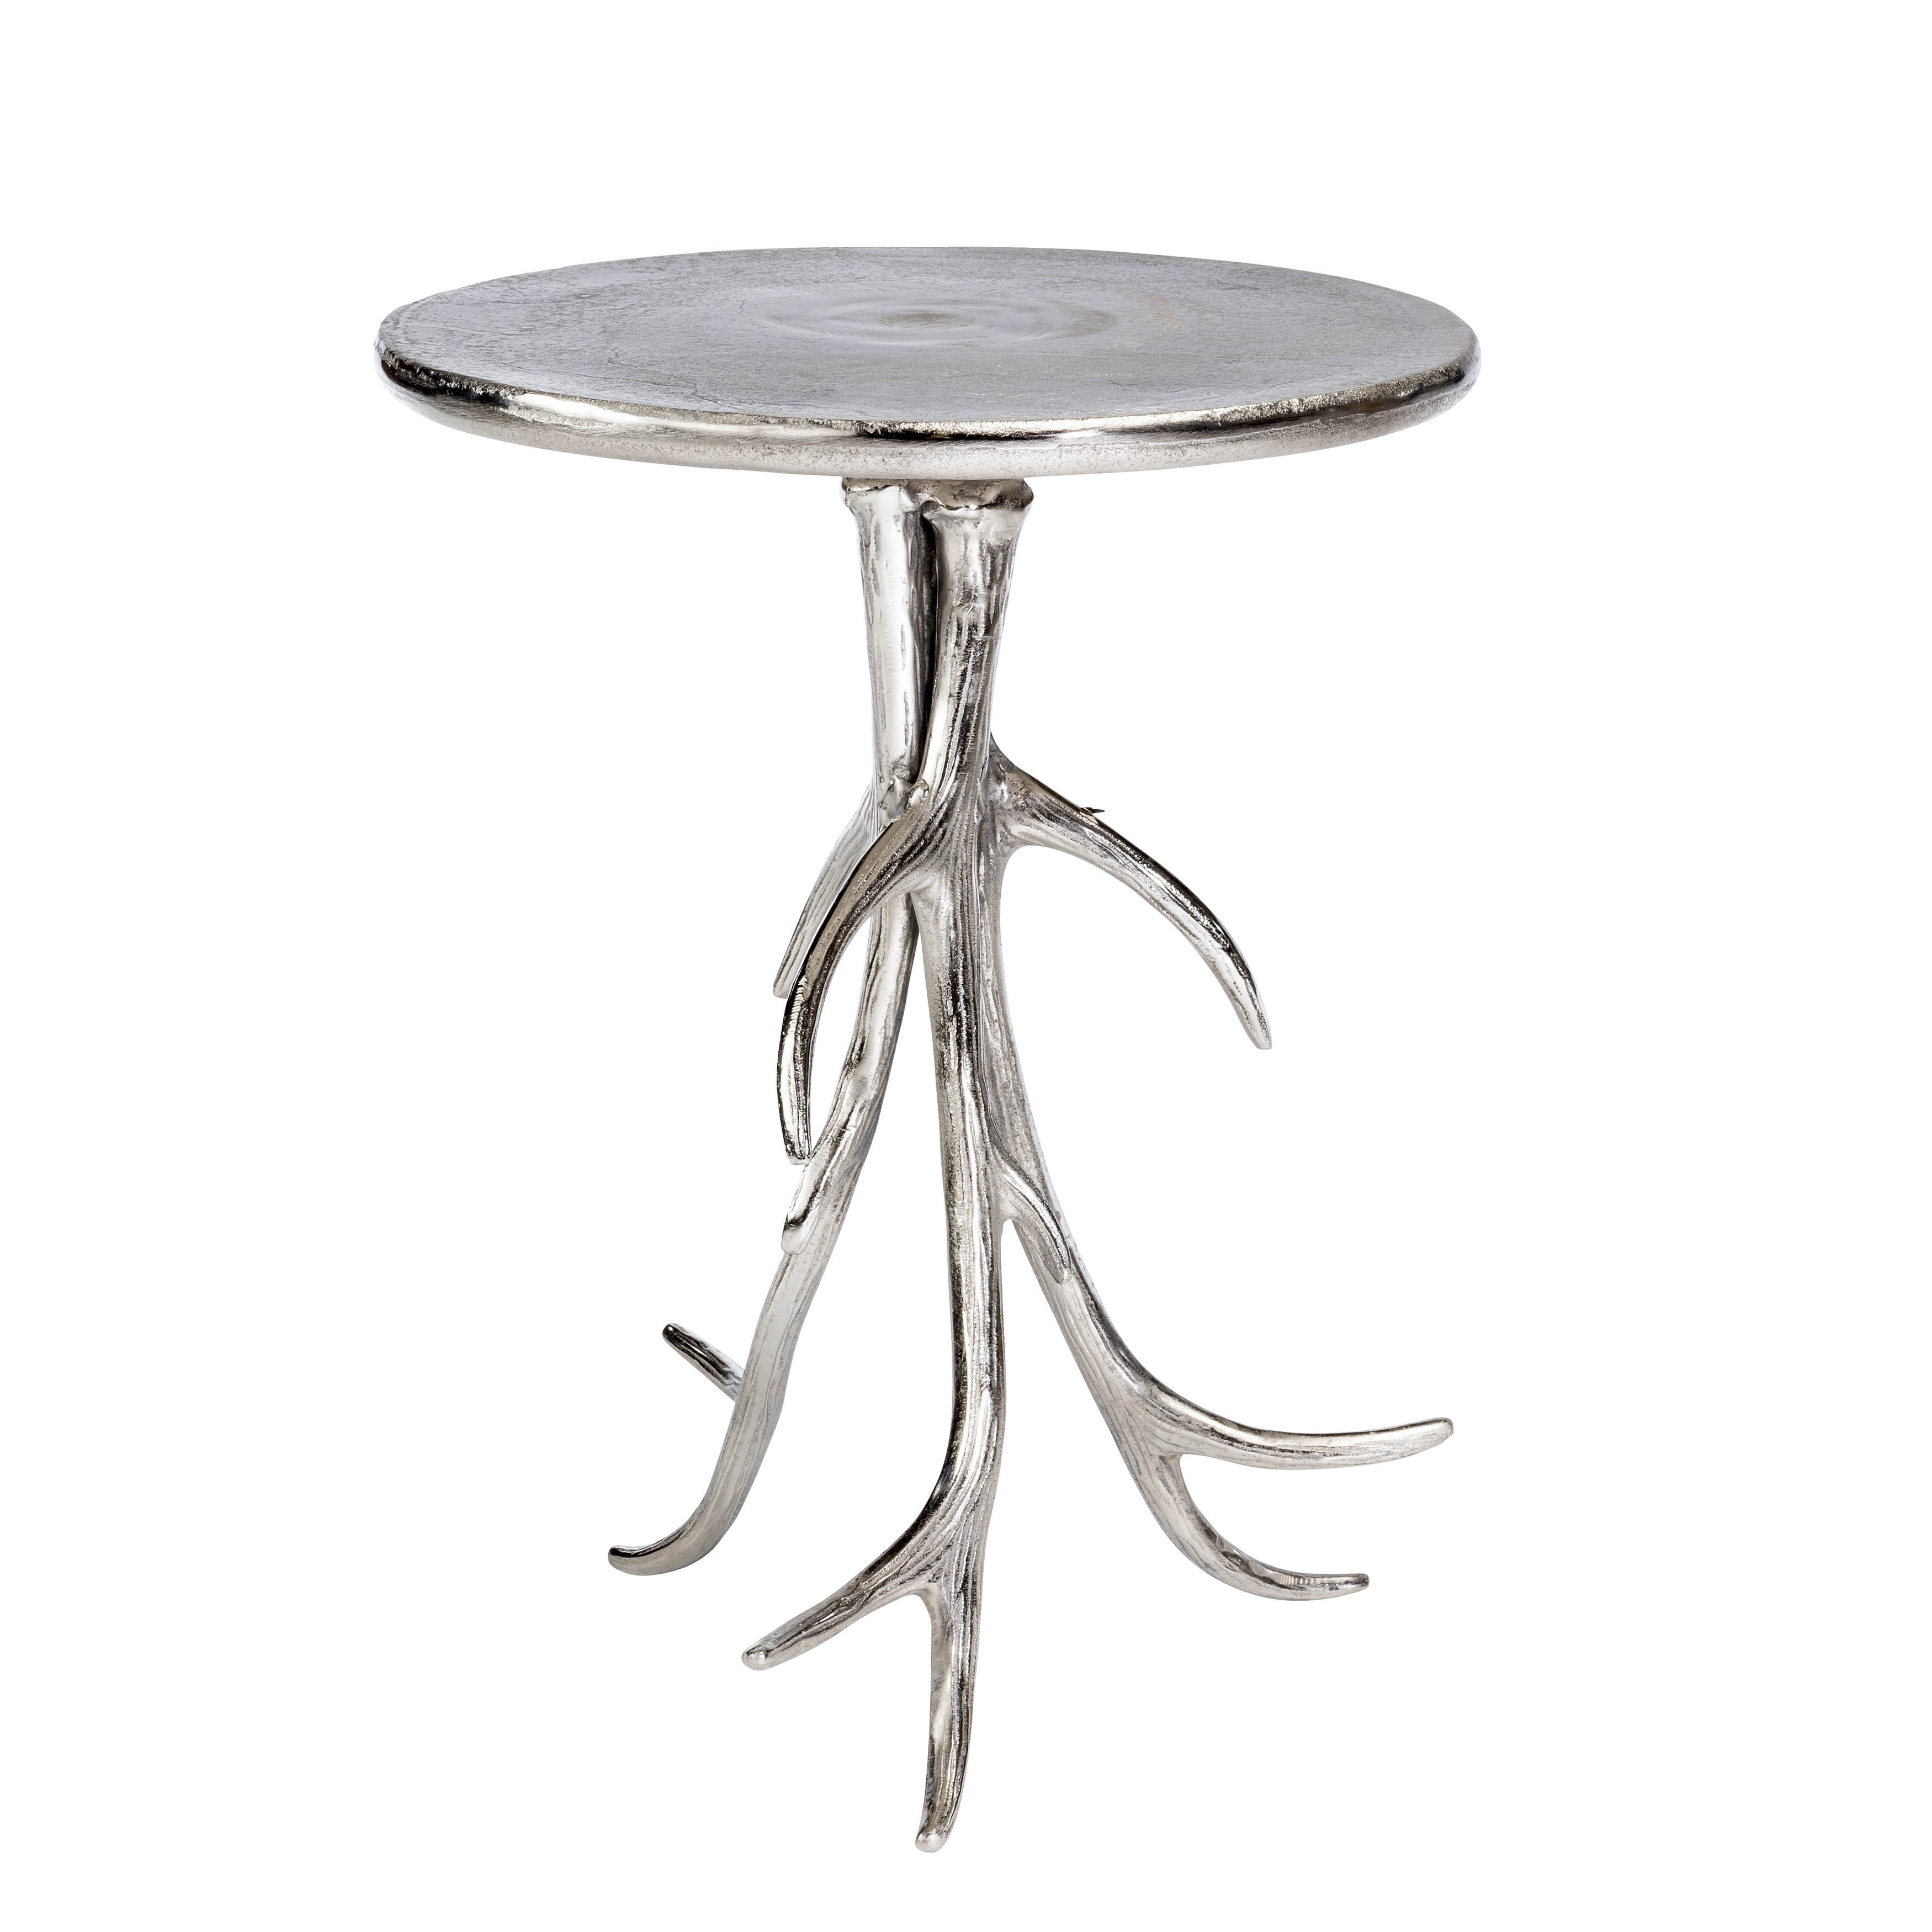 aurelle home vilson antler side table silver free vanora accent shipping today inch tall couch covers target display coffee ikea mirrored knotty pine outdoor folding vintage ethan